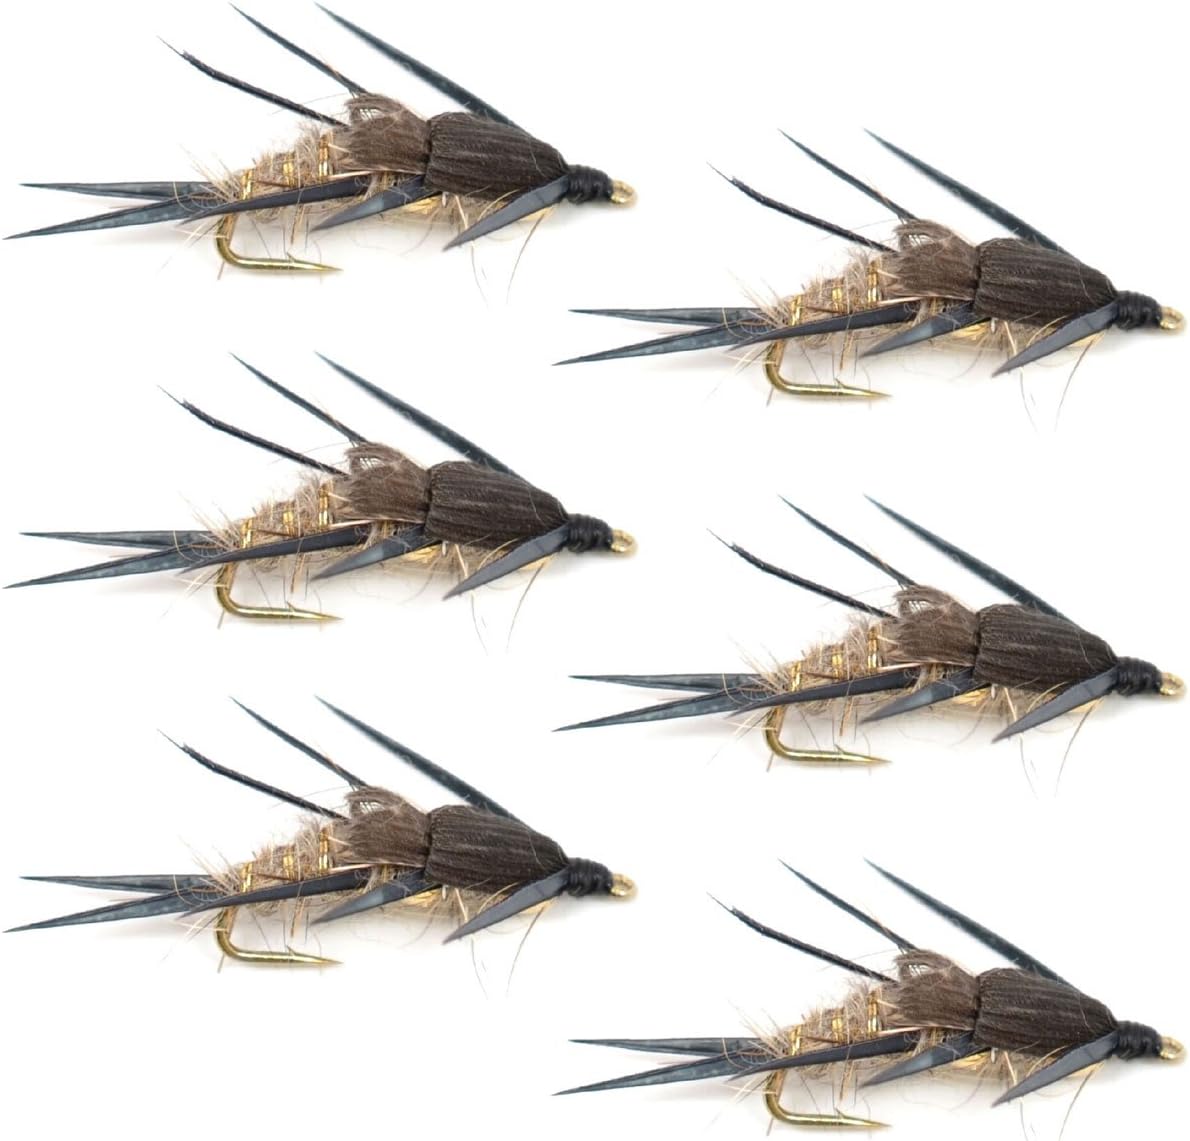 Double Bead Gold Ribbed Hare's Ear Nymph Fly Fishing Flies - Trout and Bass Wet Fly - 6 Flies Hook Size 12